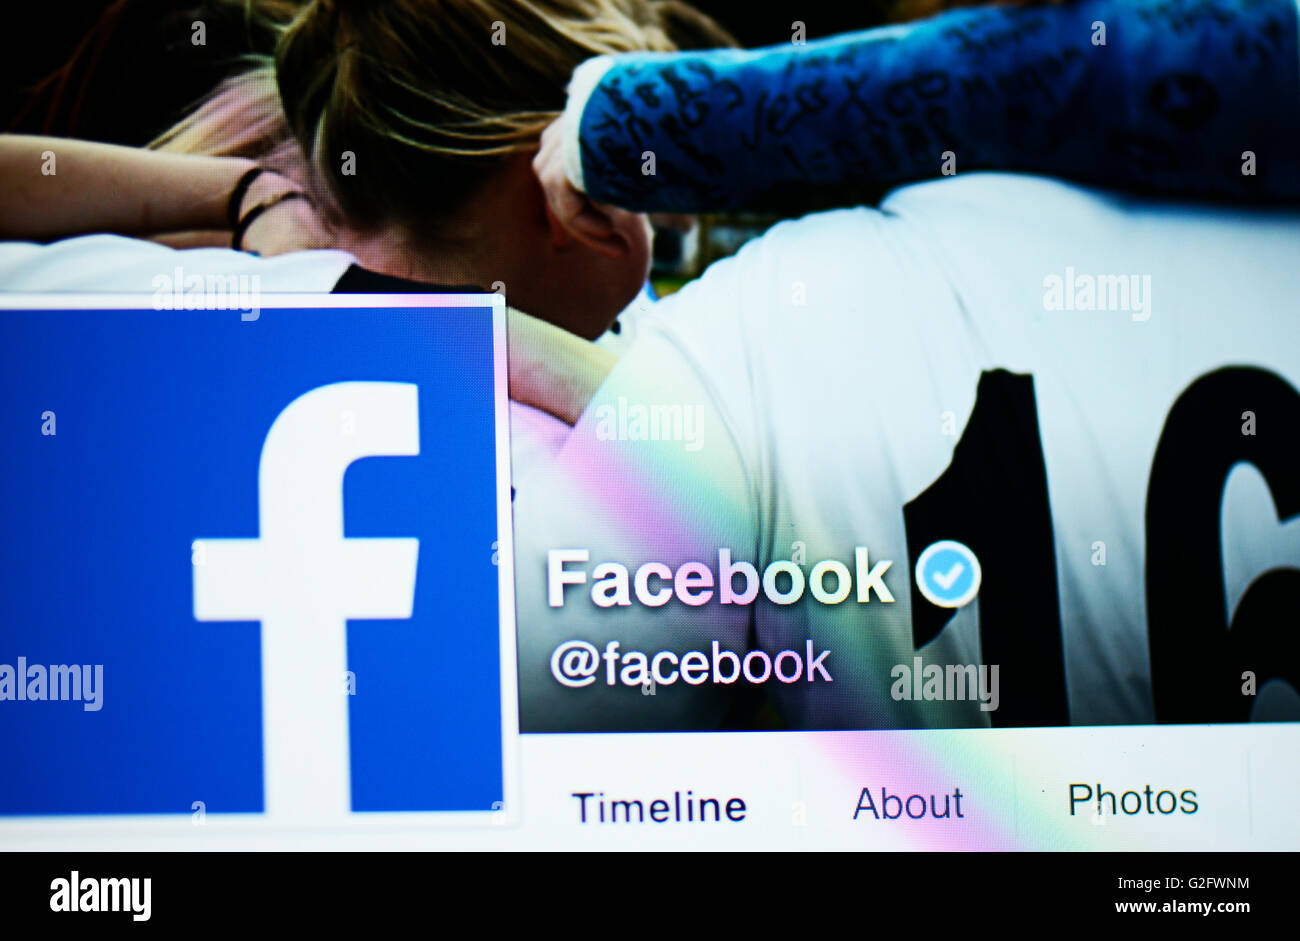 Internet explorer Browser showing Facebook home page logo displayed on a Ipad screen Stock Photo